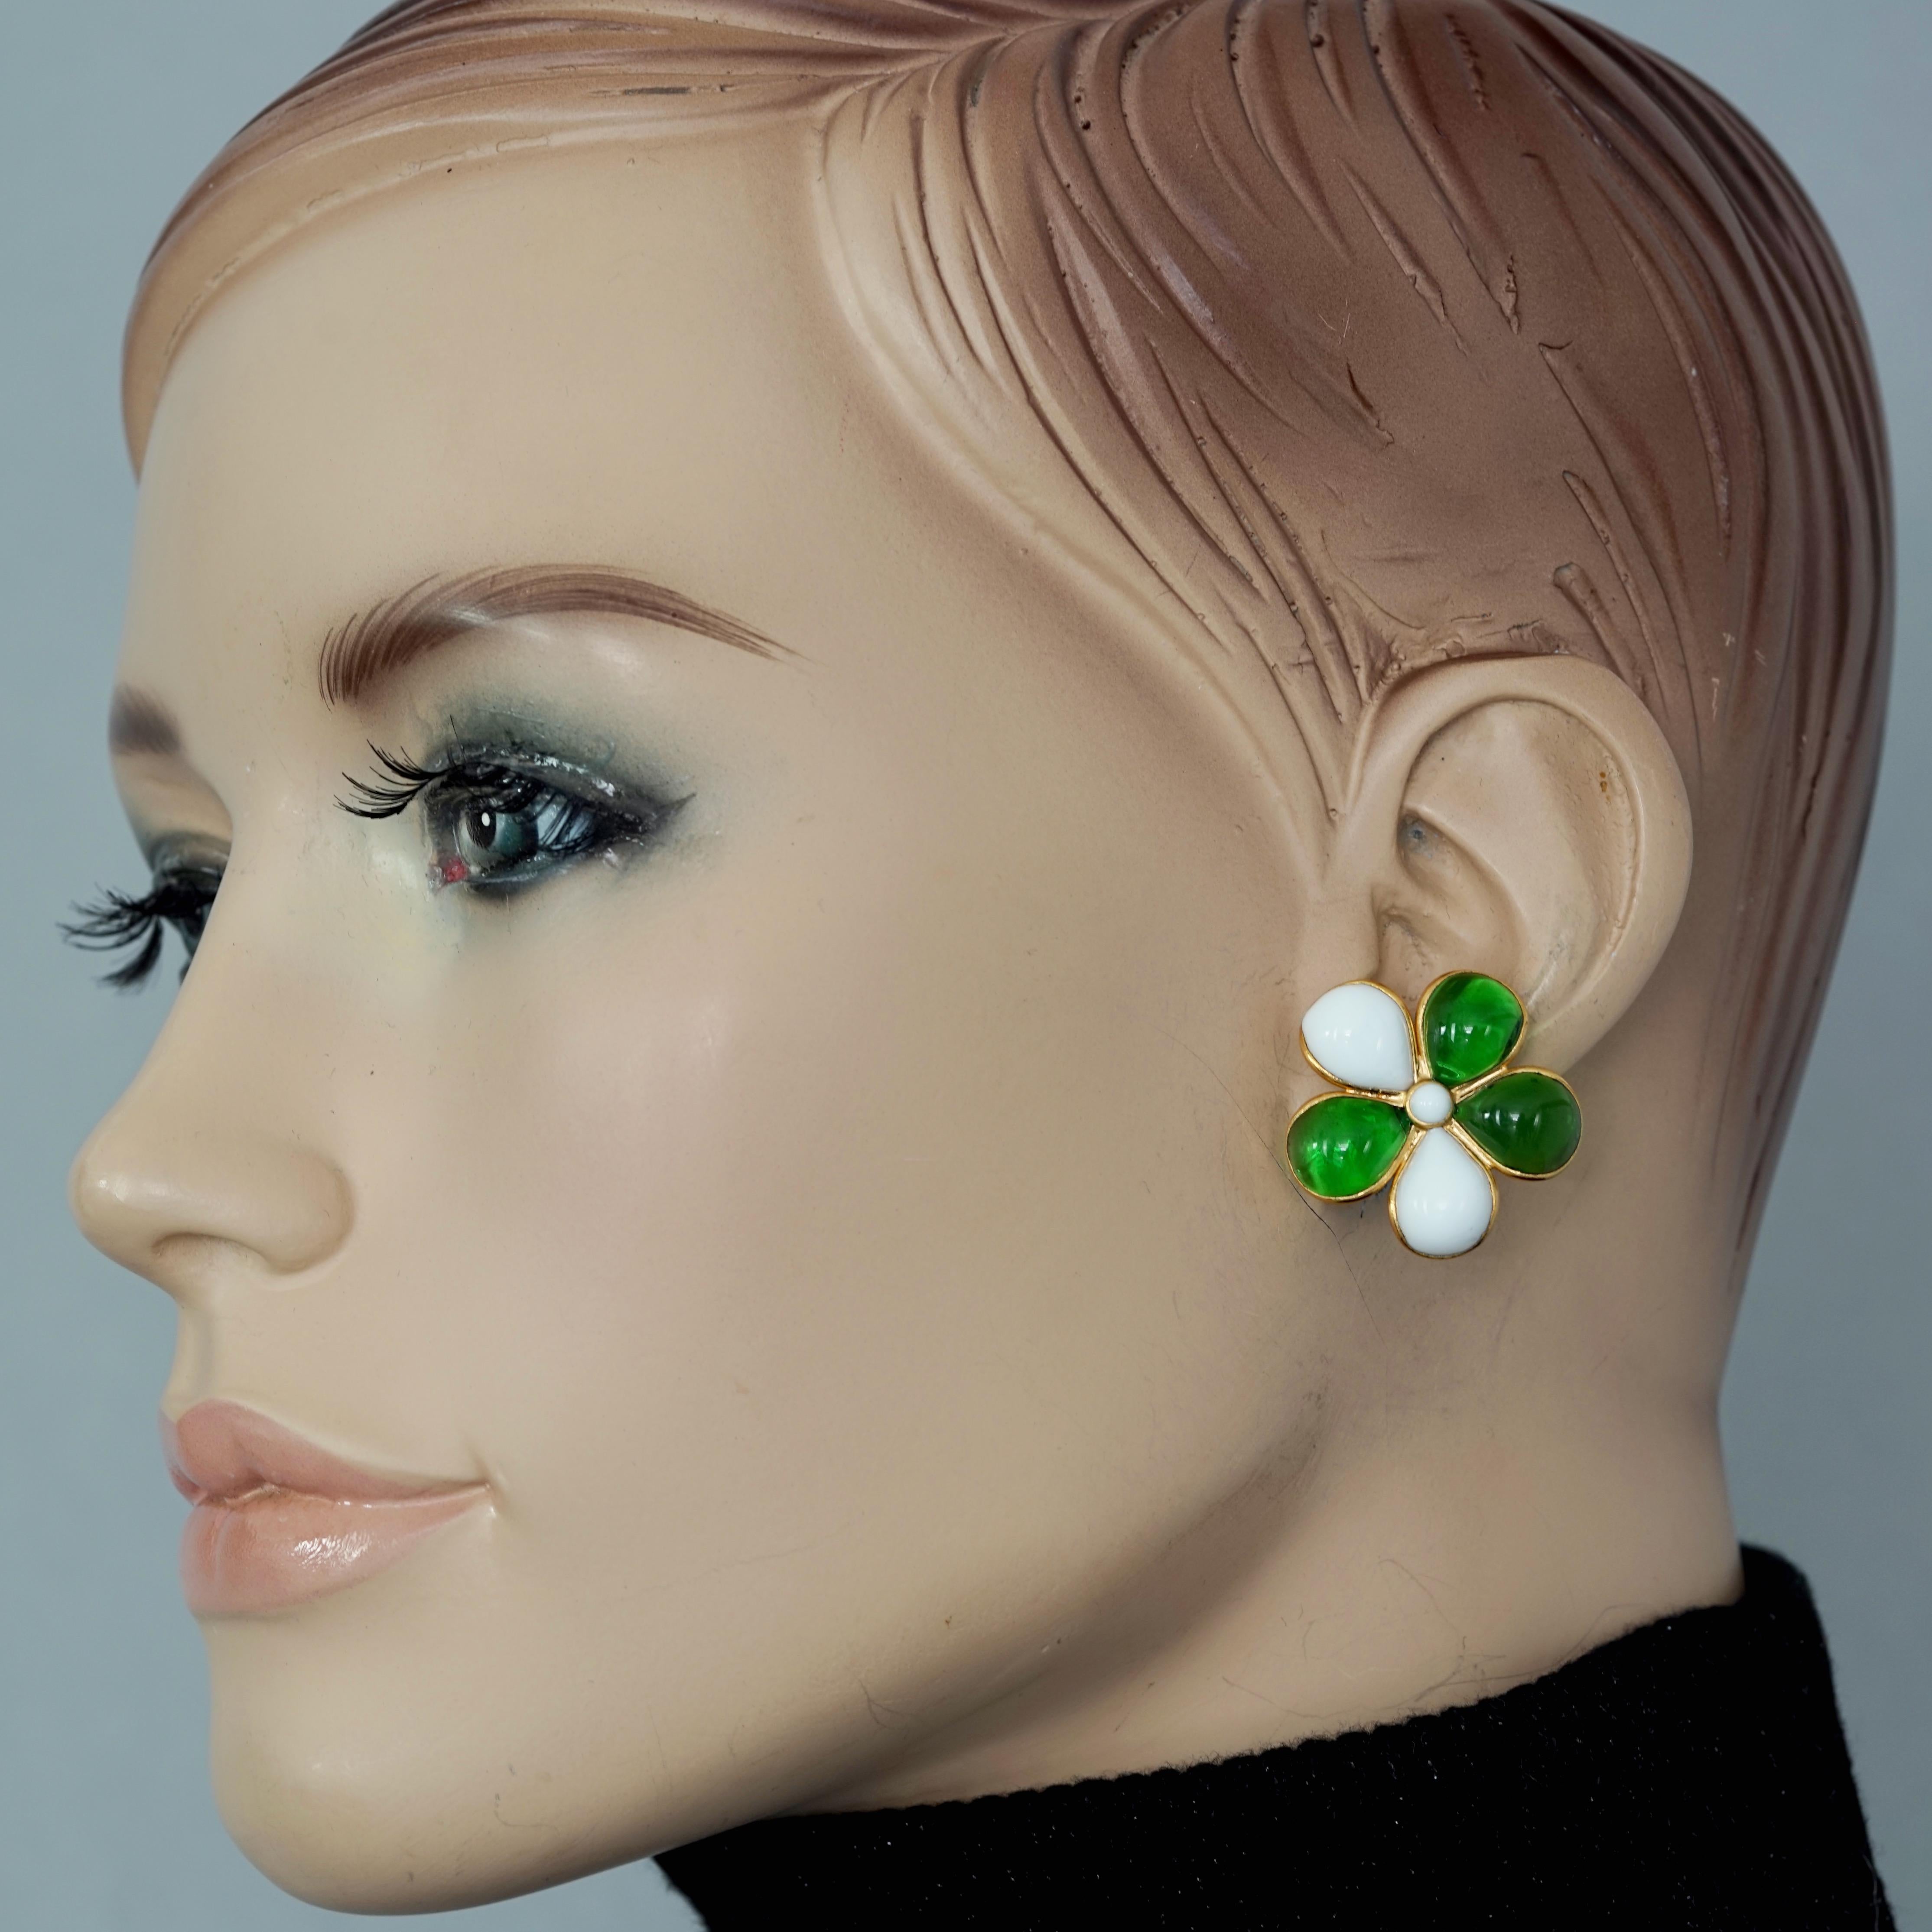 Vintage GRIPOIX Flower Green White Earrings

Measurements:
Height: 1.02 inches (2.6 cm)
Width: 1.02 inches (2.6 cm)
Weight: 6 grams

Features:.
- French Gripoix/ glass paste flower earrings in green and white.
- Post back earrings for pierced